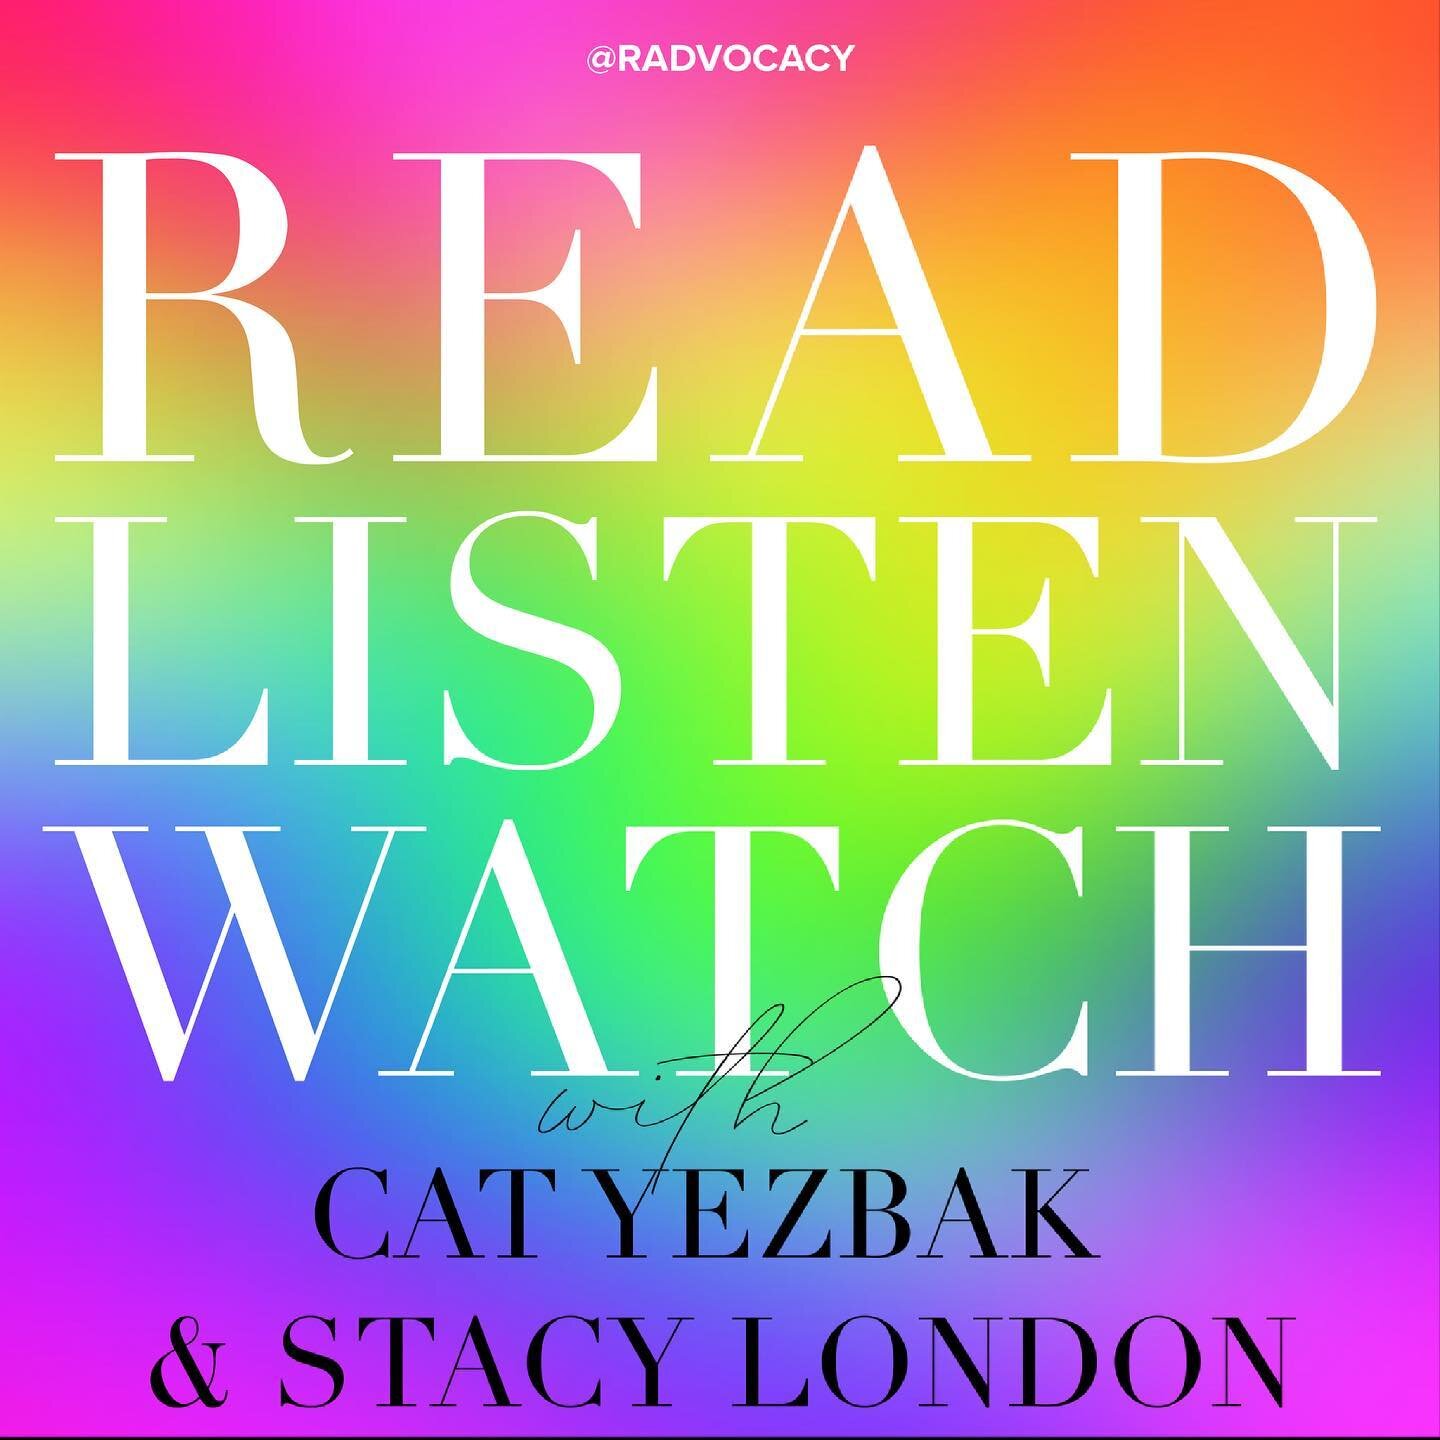 Here's a first! 📣 The fabulous couple @stacylondonreal and @catyezbak giving us a DOUBLE DOSE of what to READ, LISTEN and WATCH this PRIDE month! 🌈  @stacylondonreal is a familiar face from TLC's What Not to Wear, The Today Show, and Rachael Ray. S